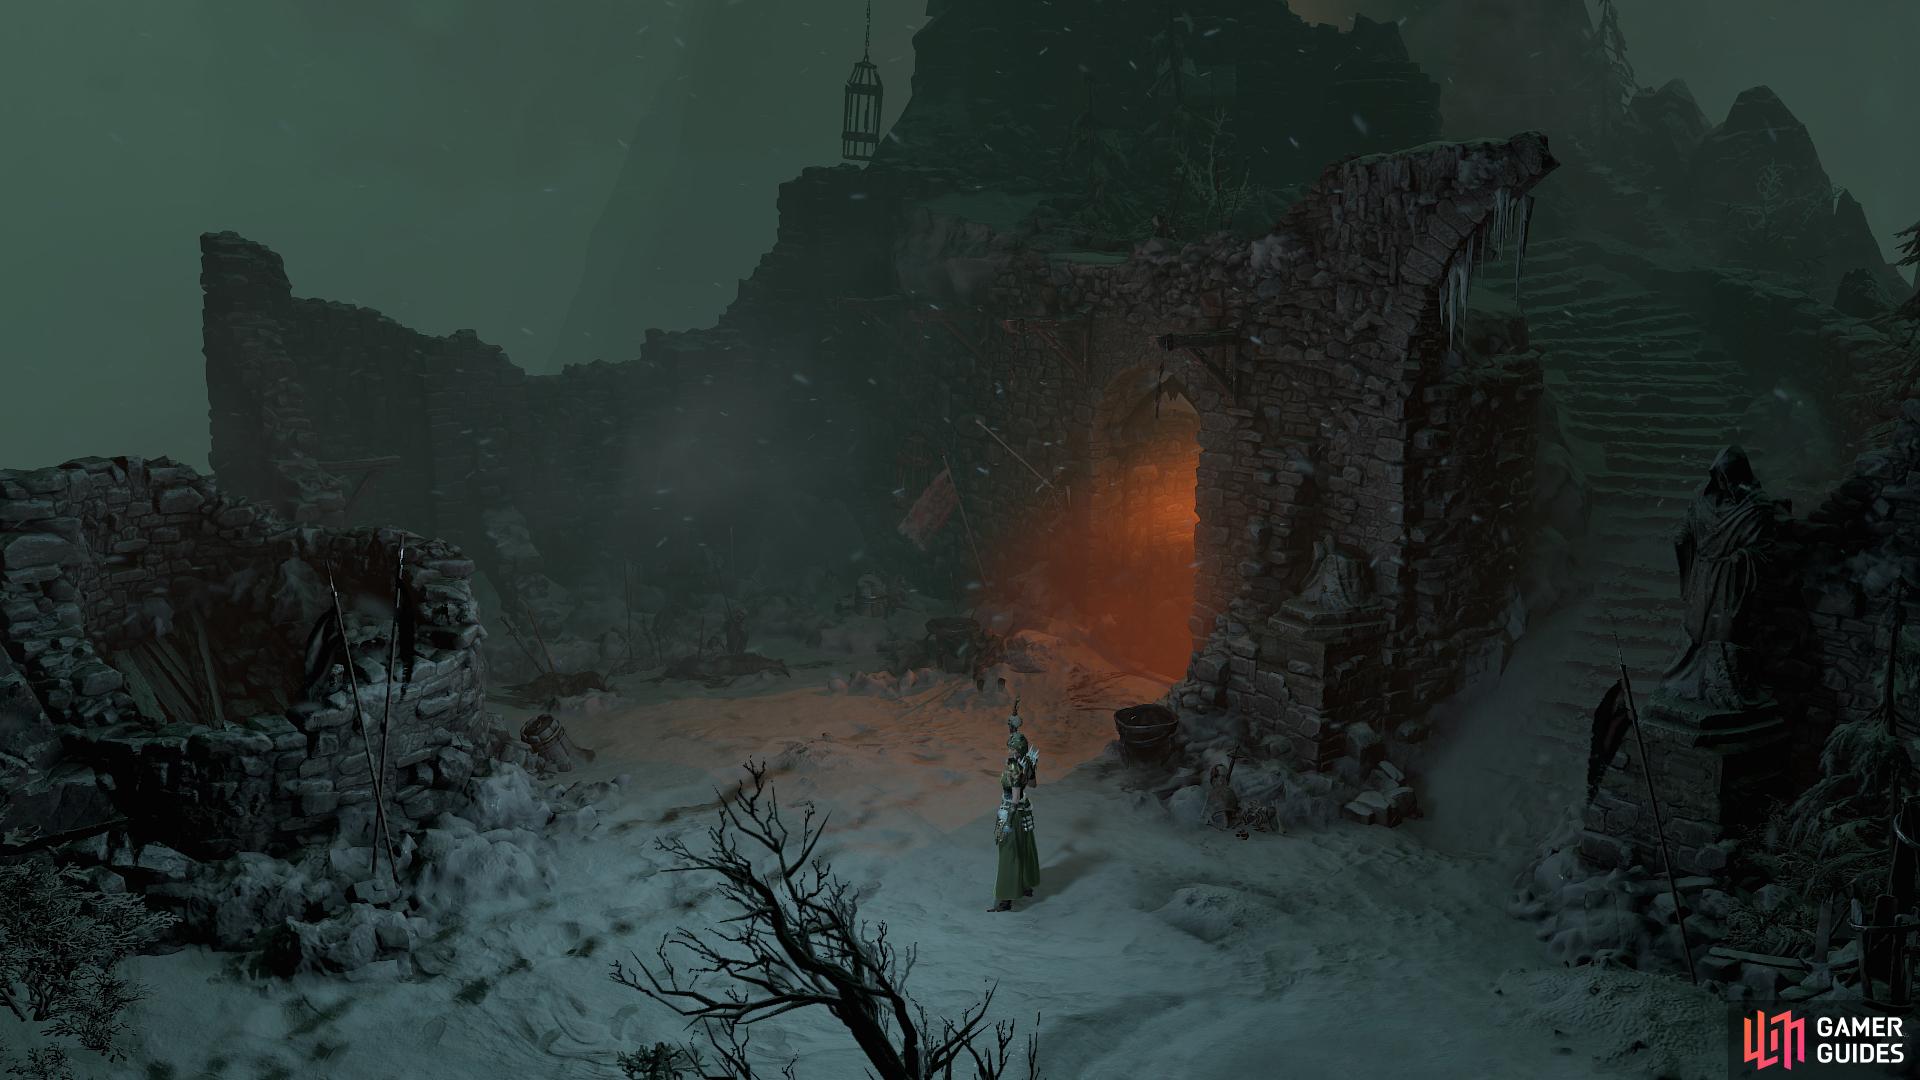 It is fair to say that if you want Diablo IV to look as nice as some of the screenshots we have seen you will have to crank up the detail beyond what is suggested here.